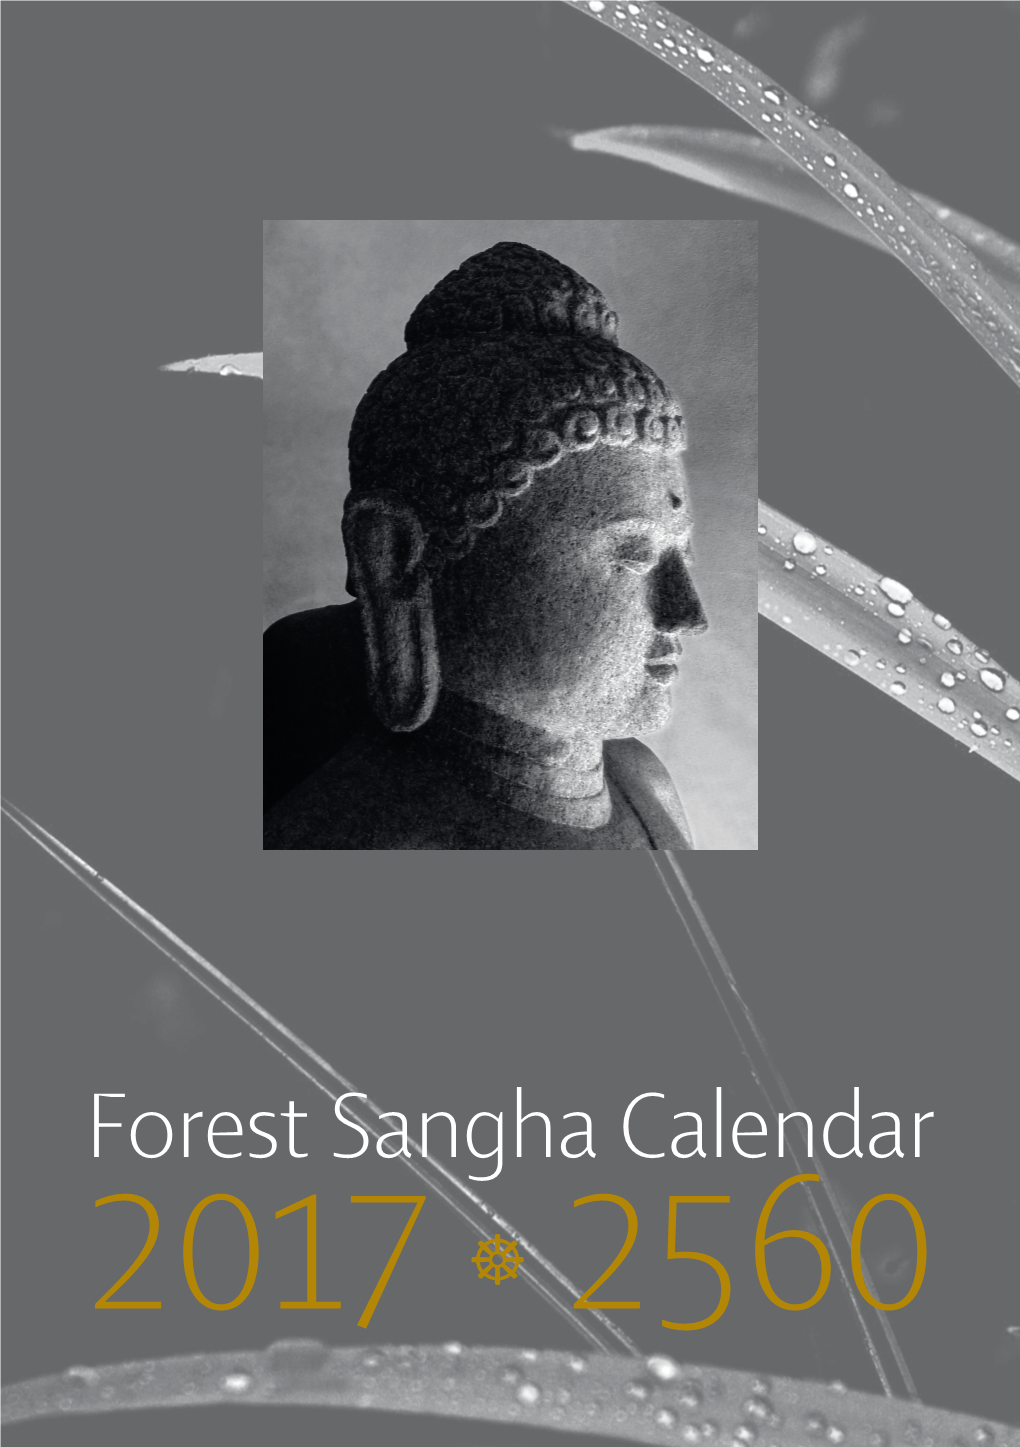 Forest Sangha Calendar 2017 ☸ 2560 This Calendar Has Been Sponsored for Free Distribution by the Kataññutā Group of Malaysia, Singapore and Australia